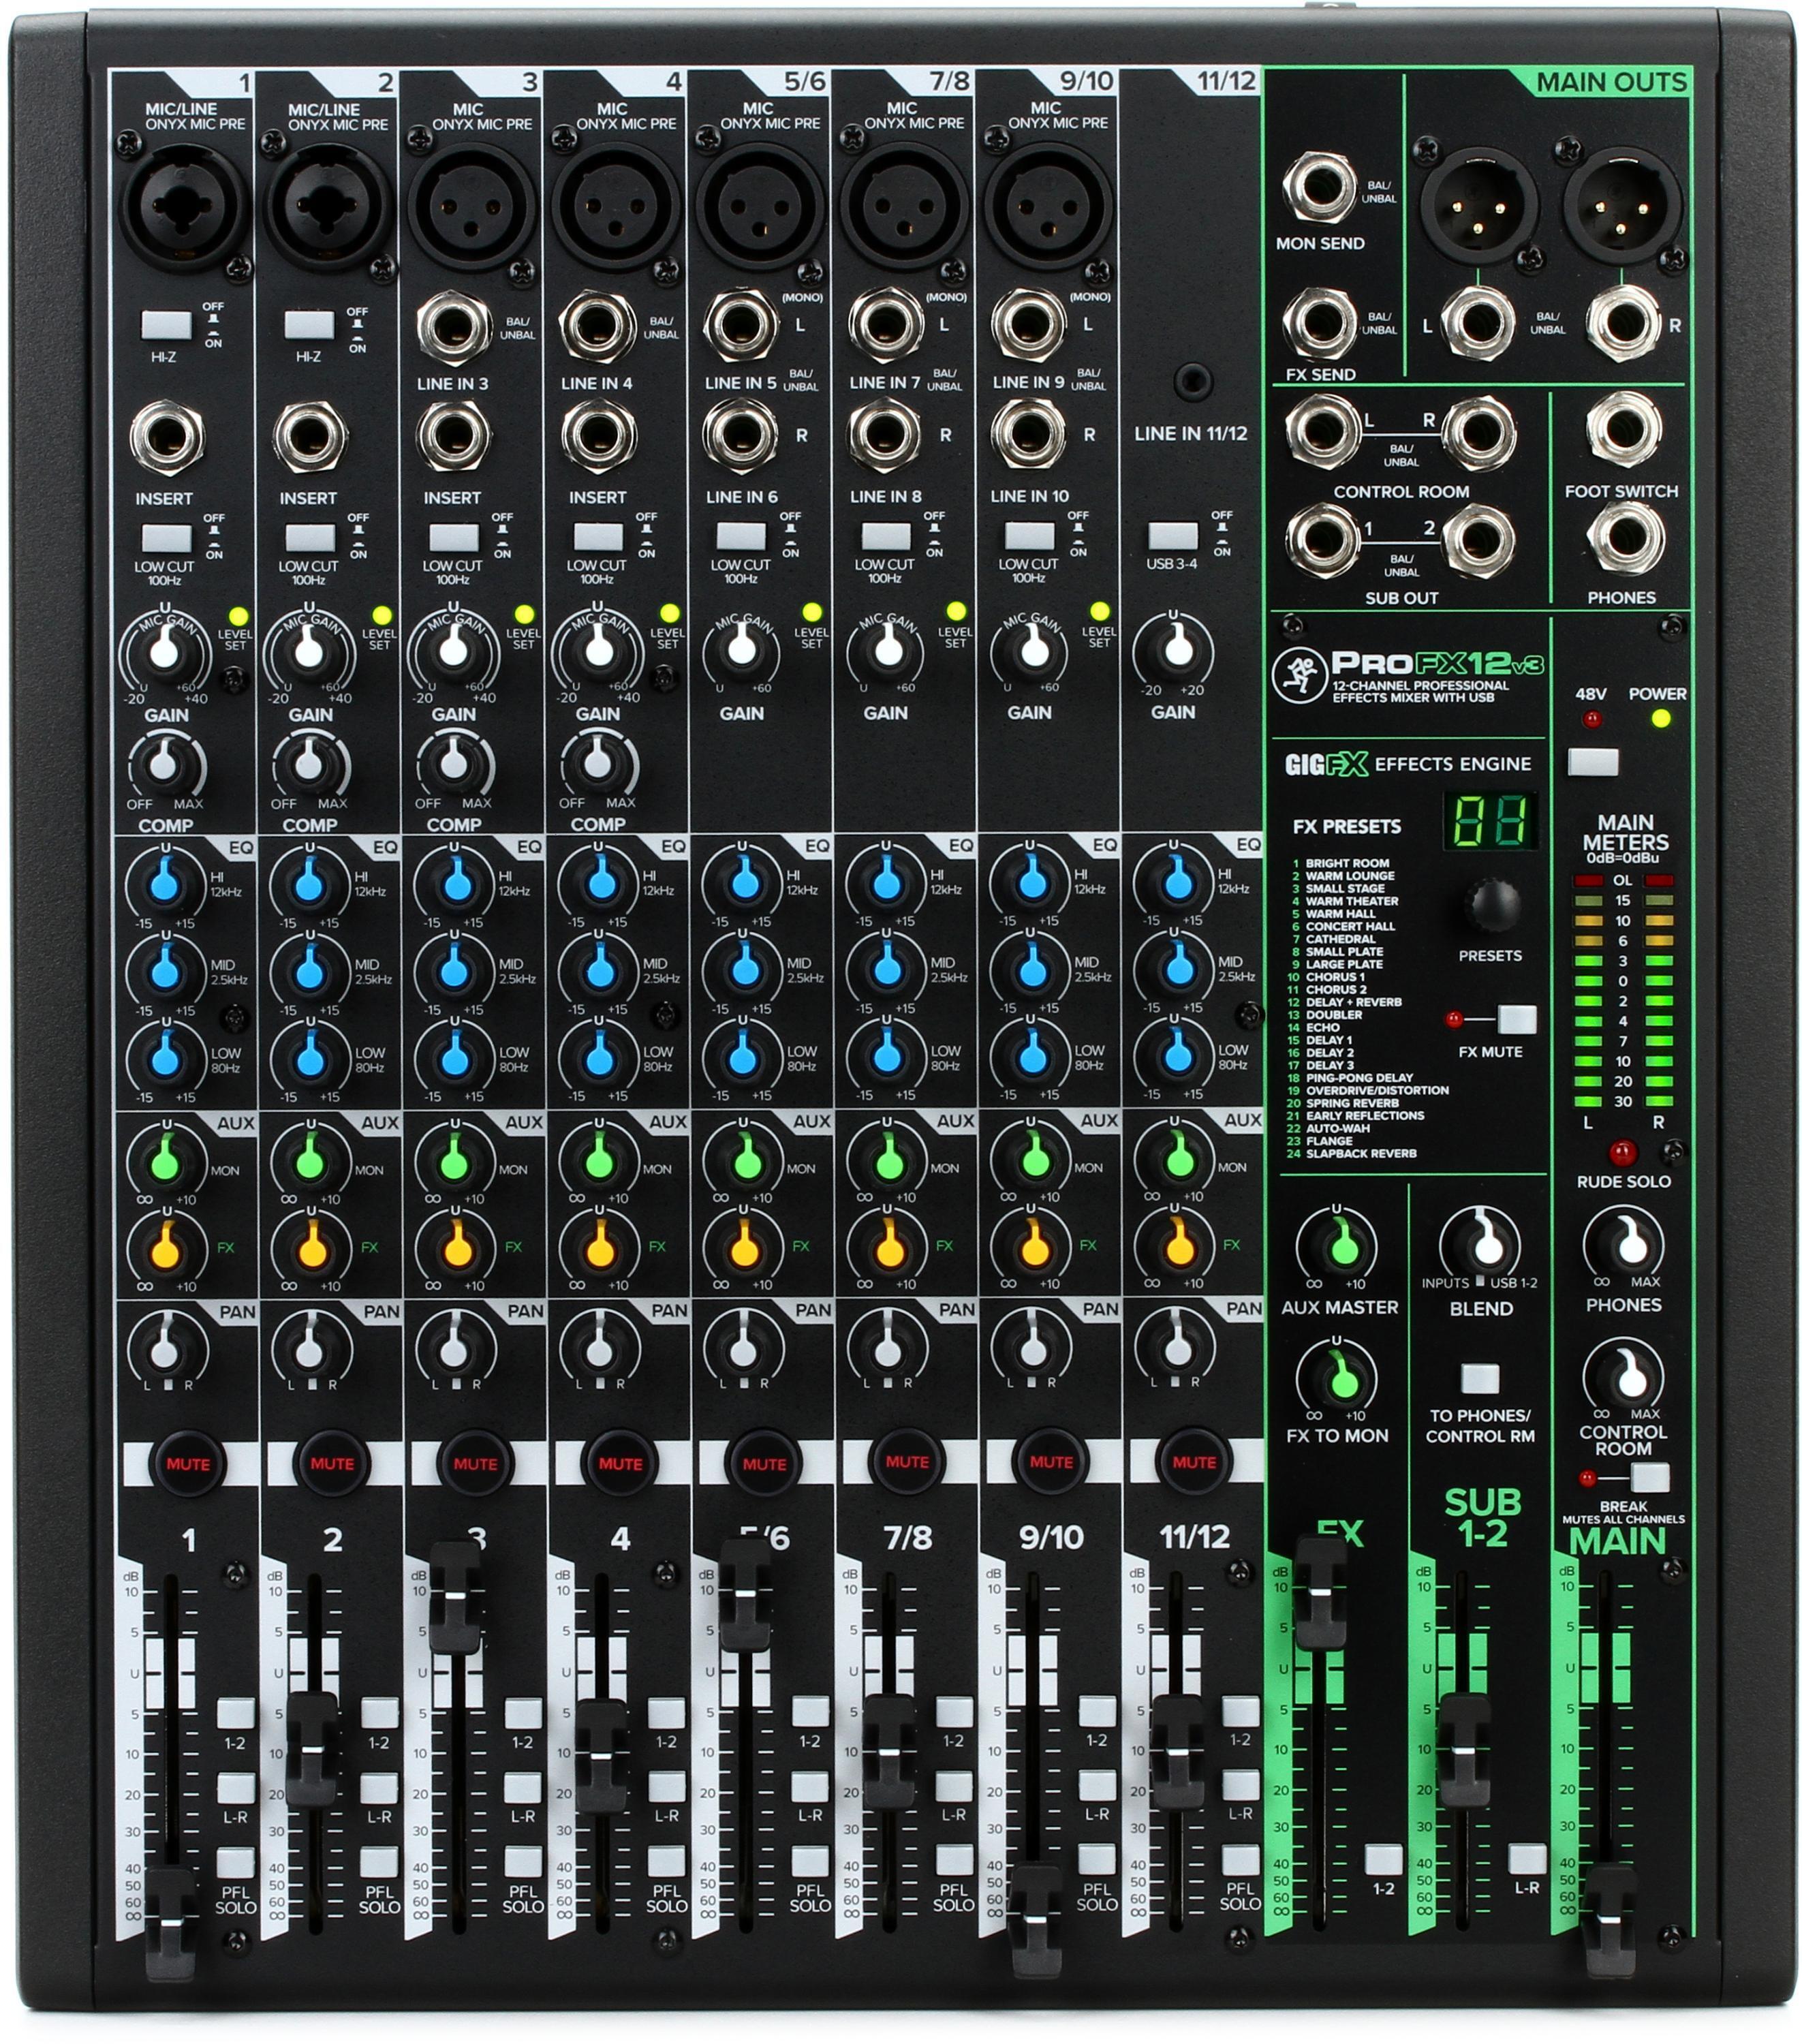 Bundled Item: Mackie ProFX12v3 12-channel Mixer with USB and Effects